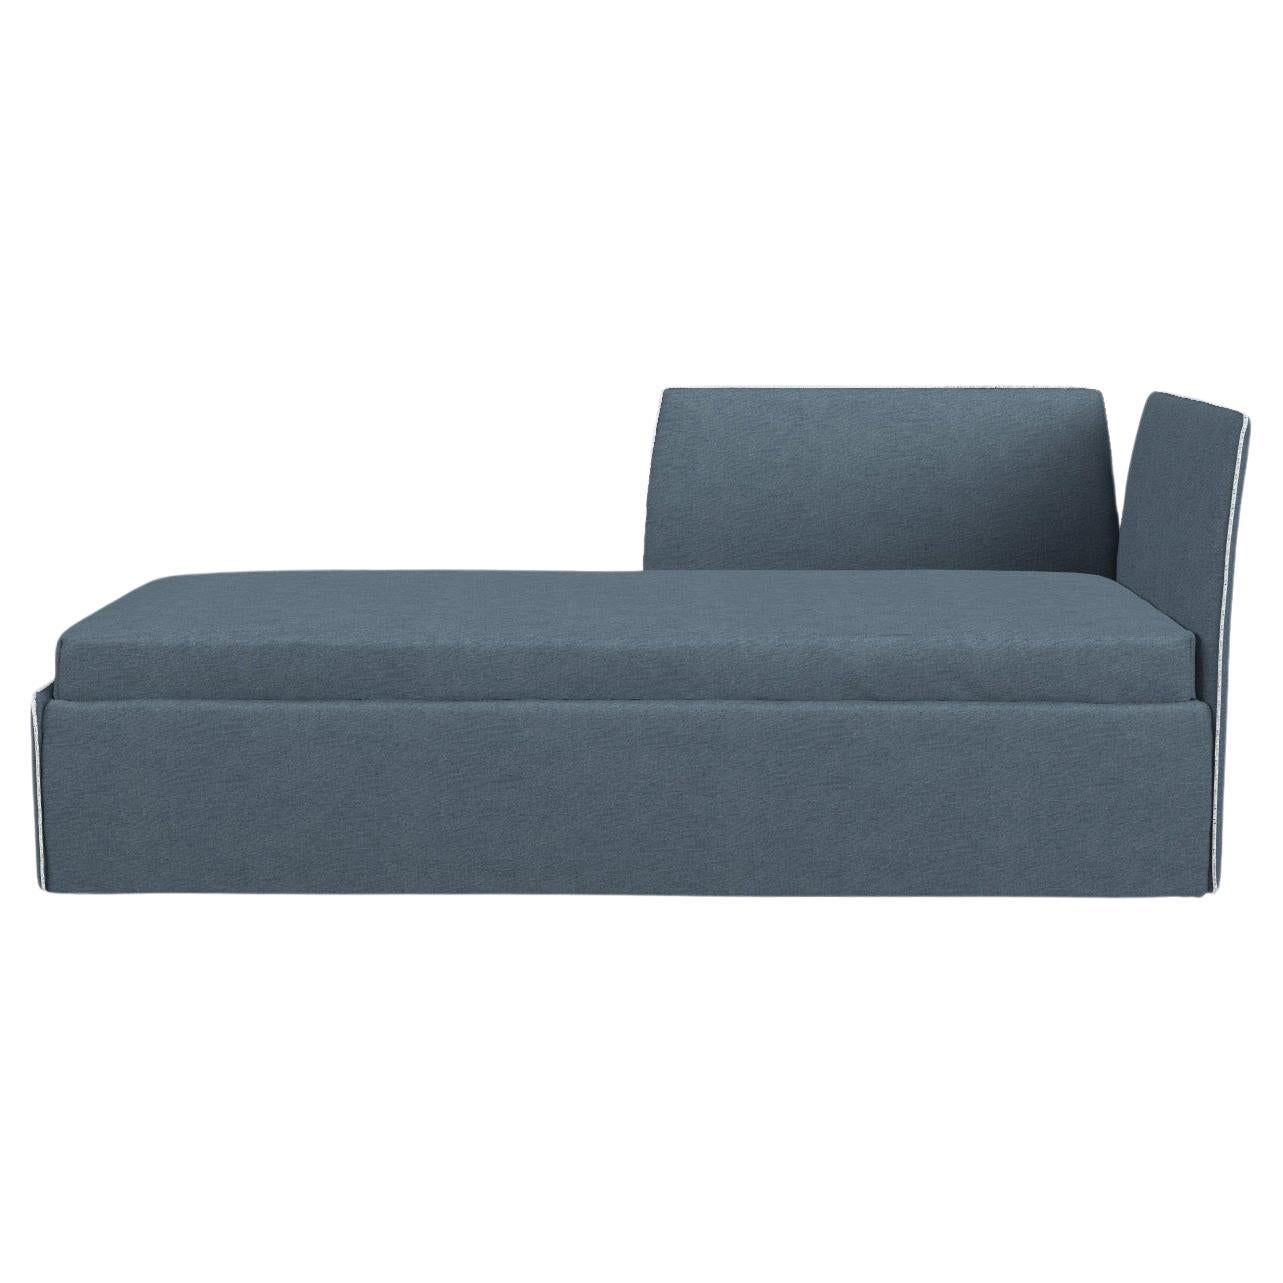 Gervasoni Open 3 Small Modular Bed Sofa in Munch Upholstery by Paola Navone